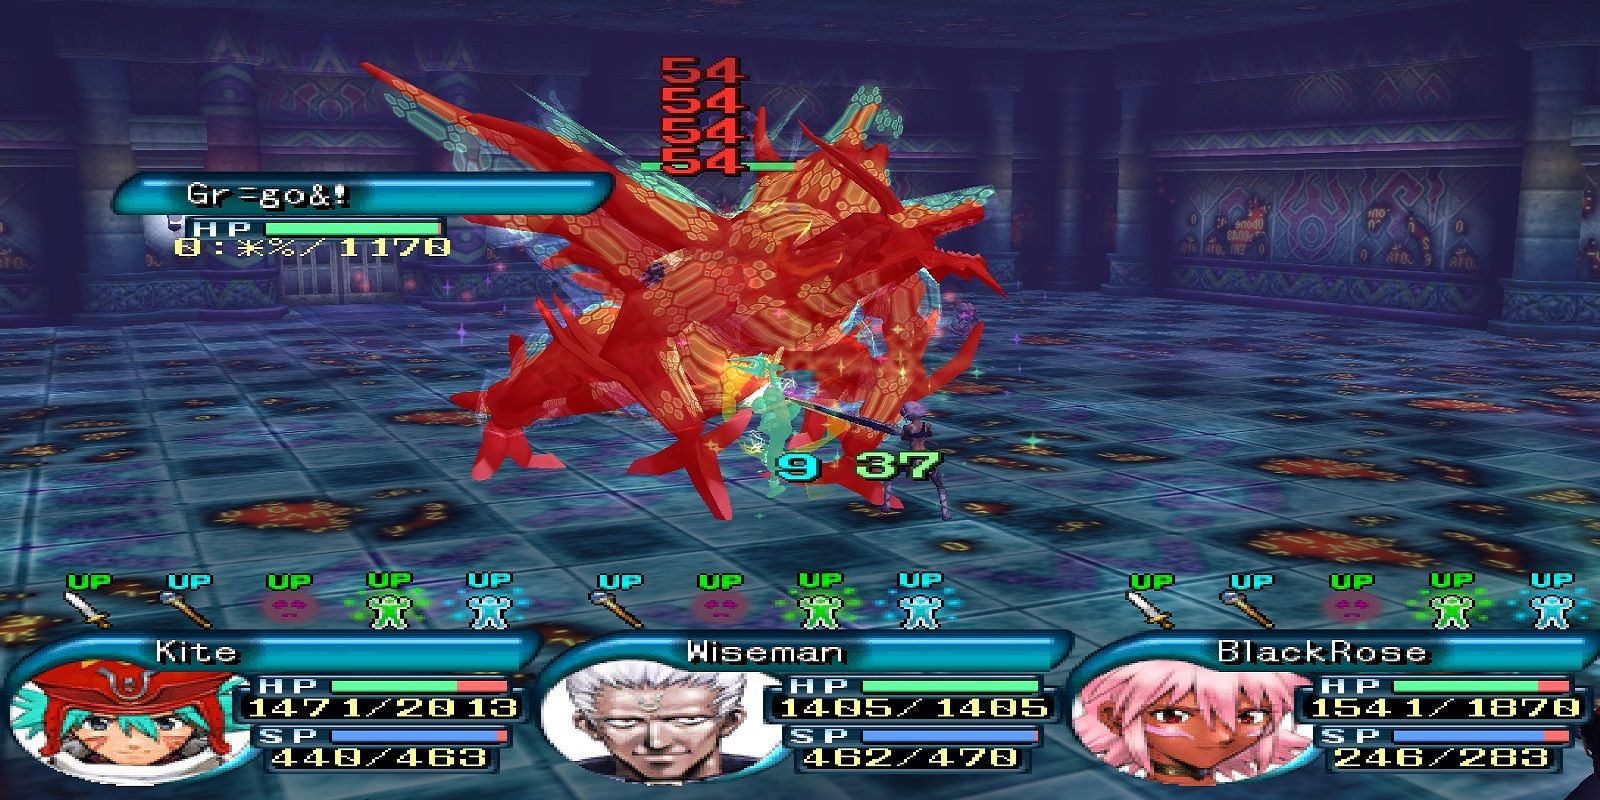 Gameplay of .hack//Sign PS2 game; a party fighting an enemy.